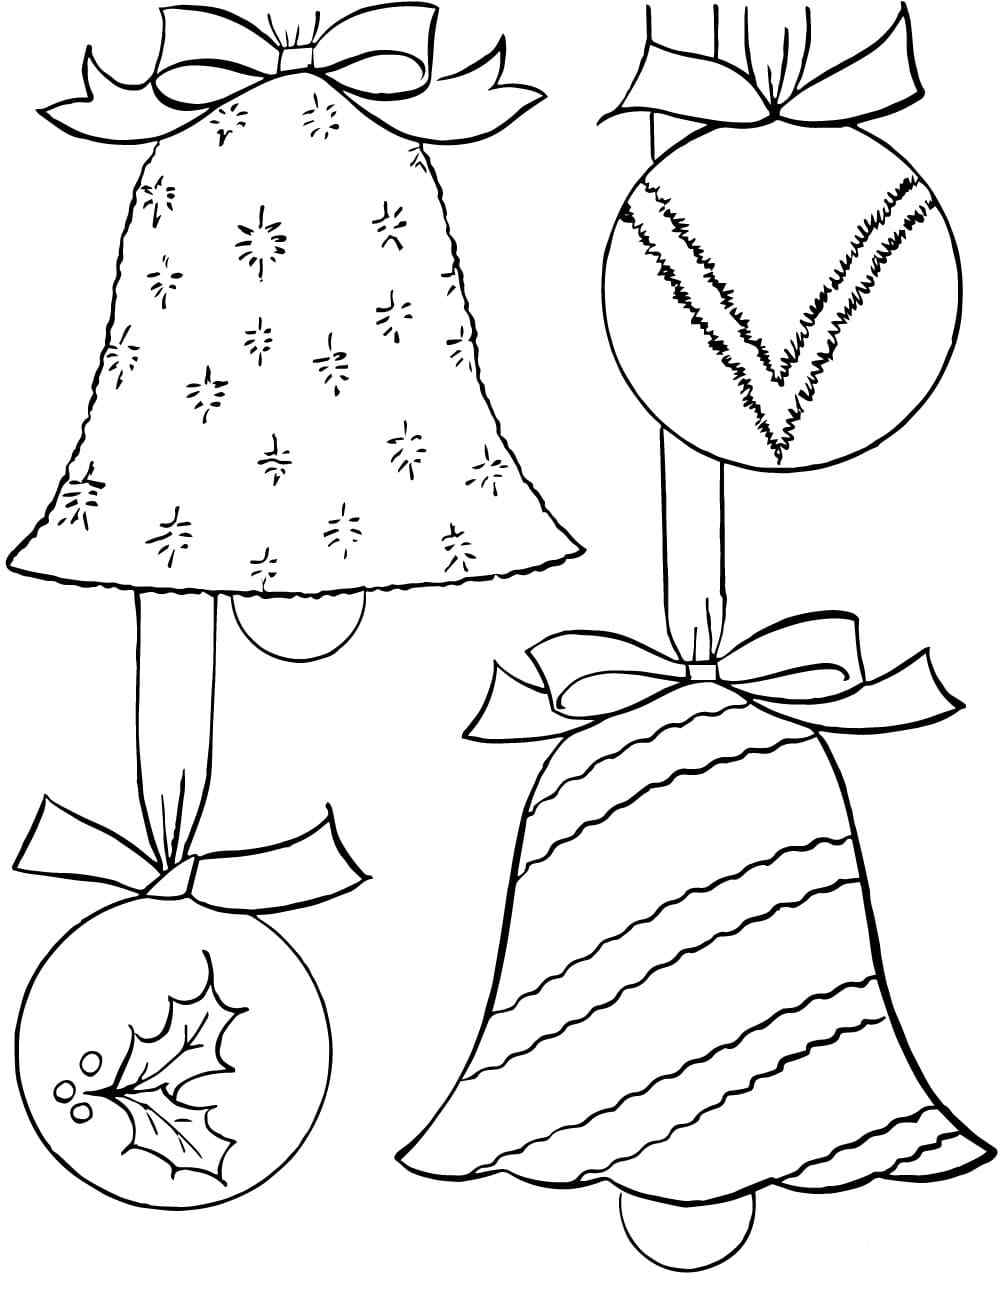 Christmas Ball Decorated With Candies Coloring Page